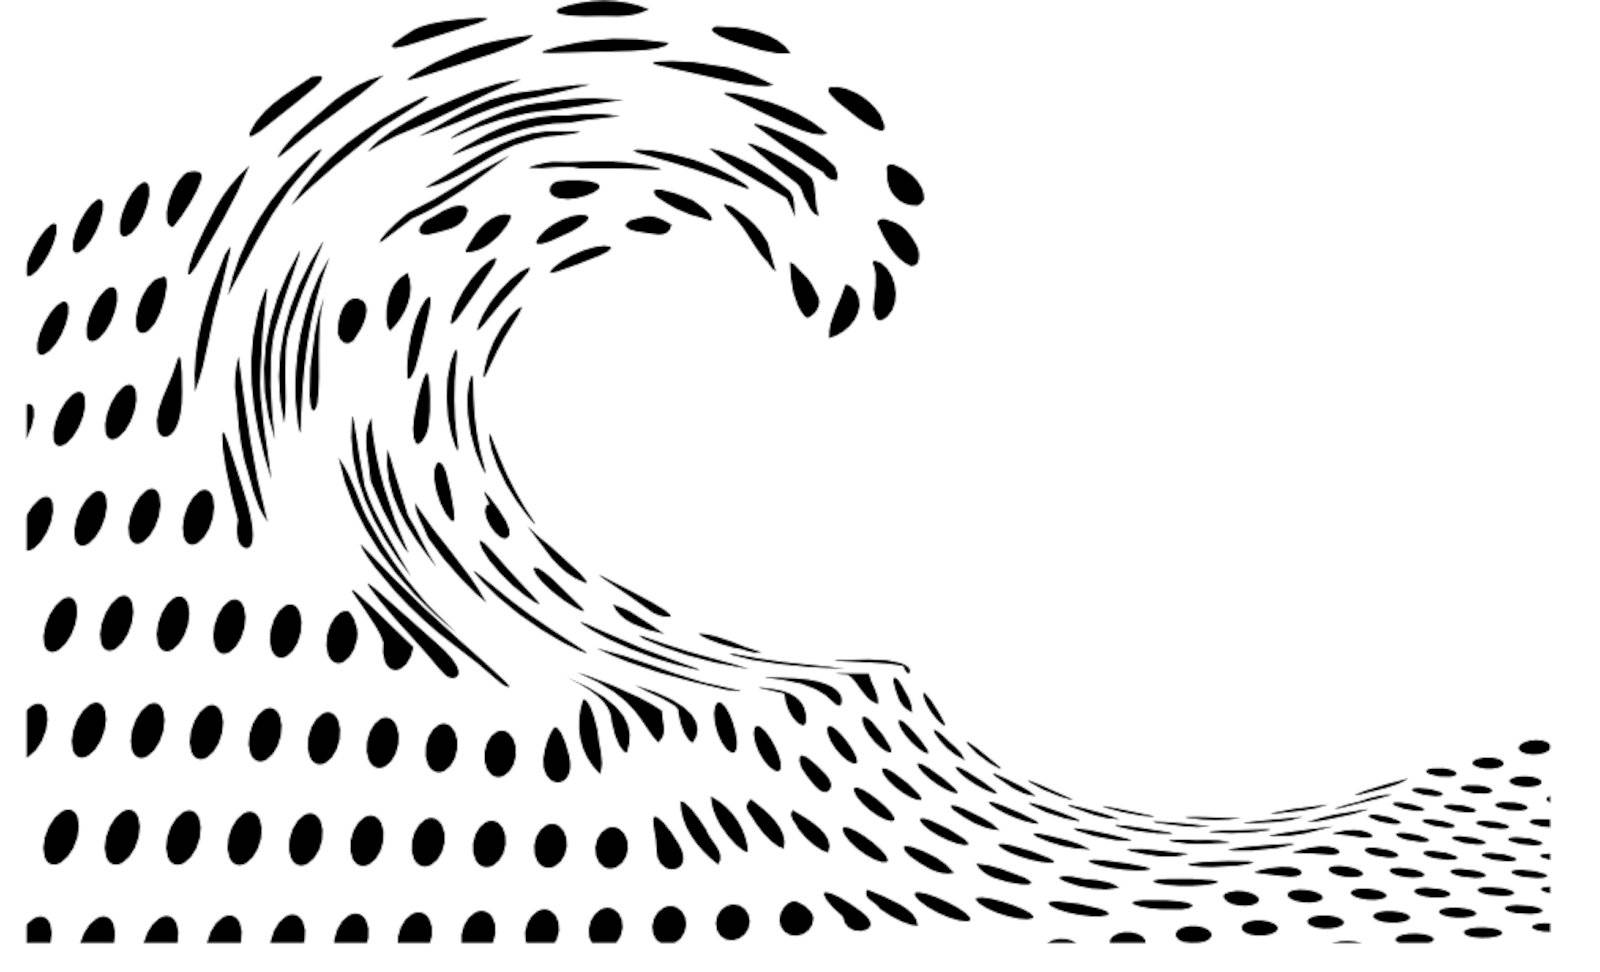 Wave illustration made out of an abstract design of circles